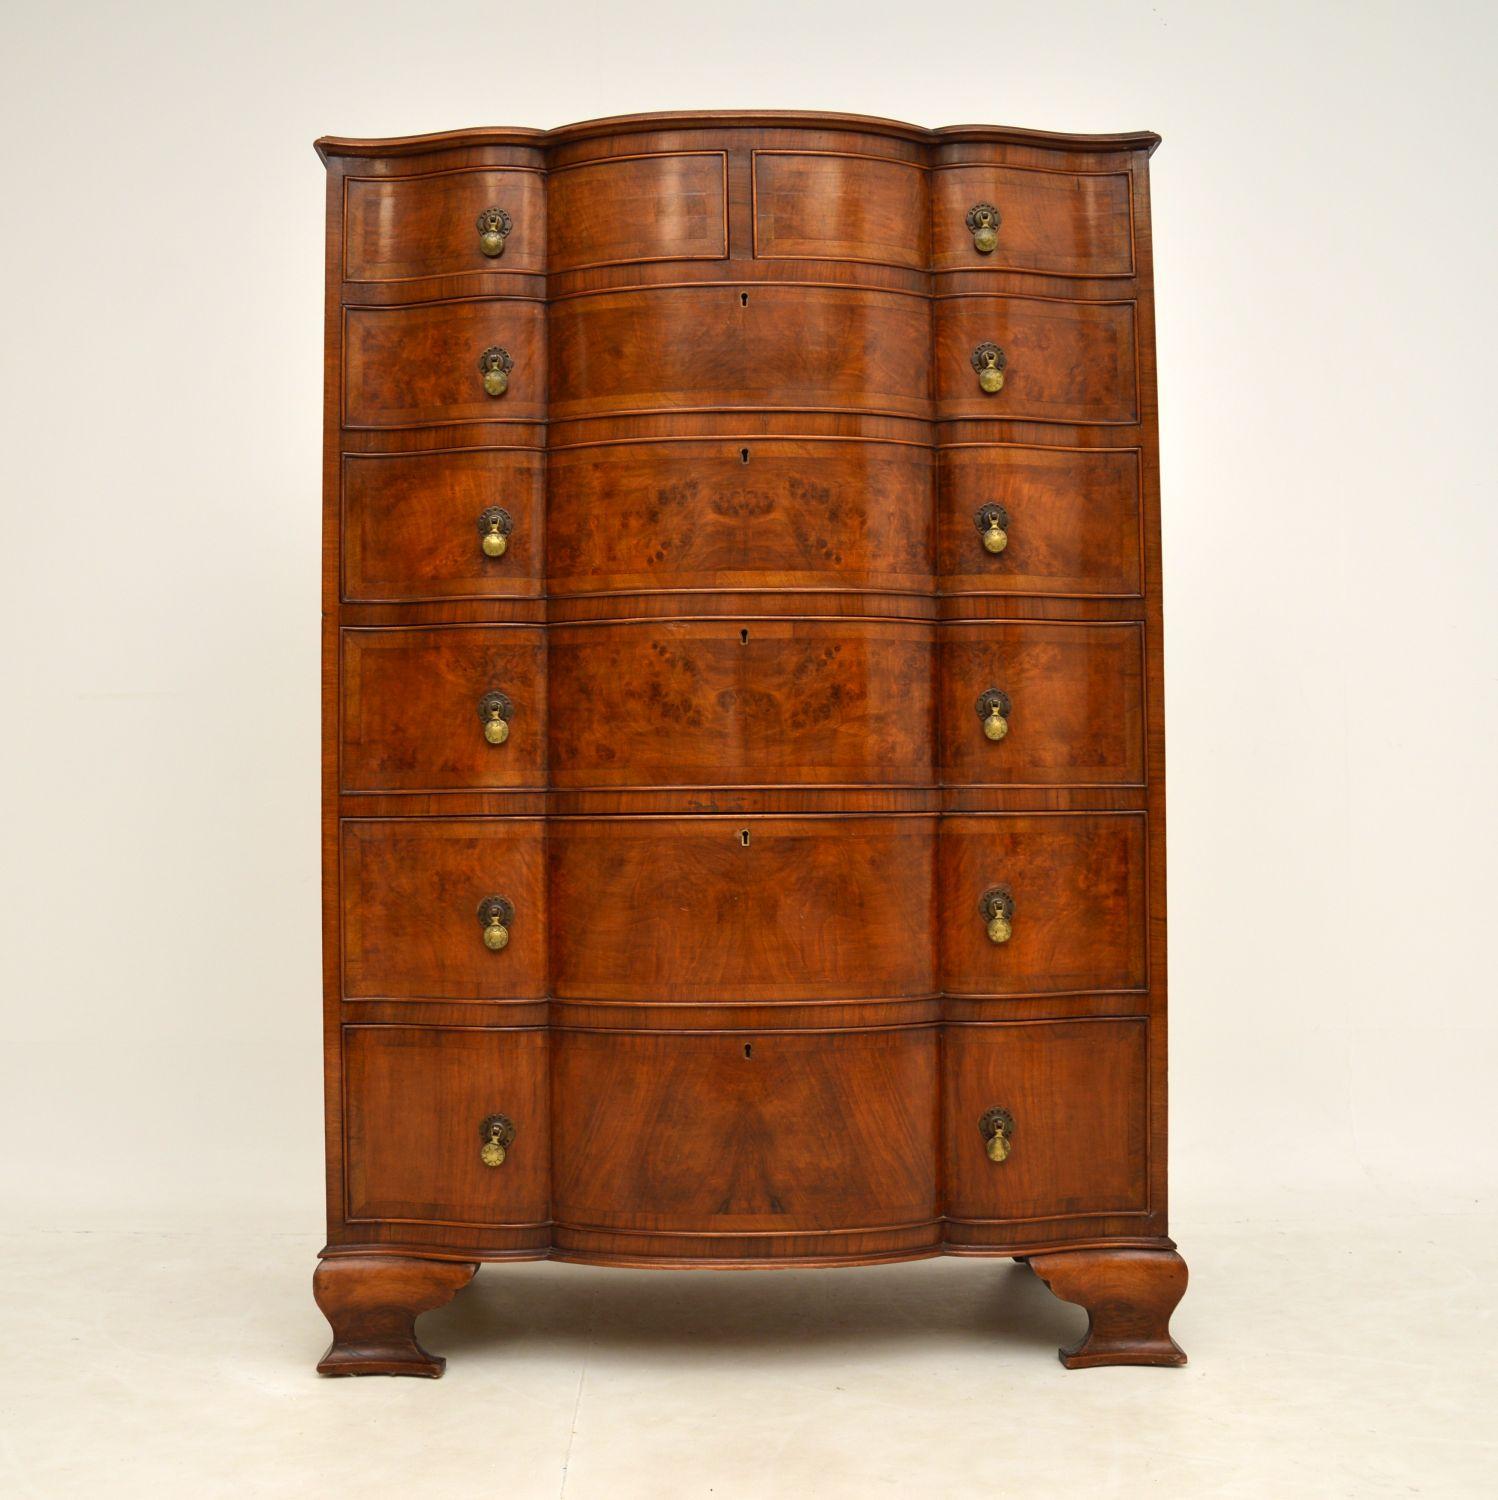 A very large and extremely impressive antique chest of drawers in burr walnut. This was made in England, it dates from around the 1910-1920 period.

The quality is absolutely amazing, this has wonderful details throughout. It has a beautifully